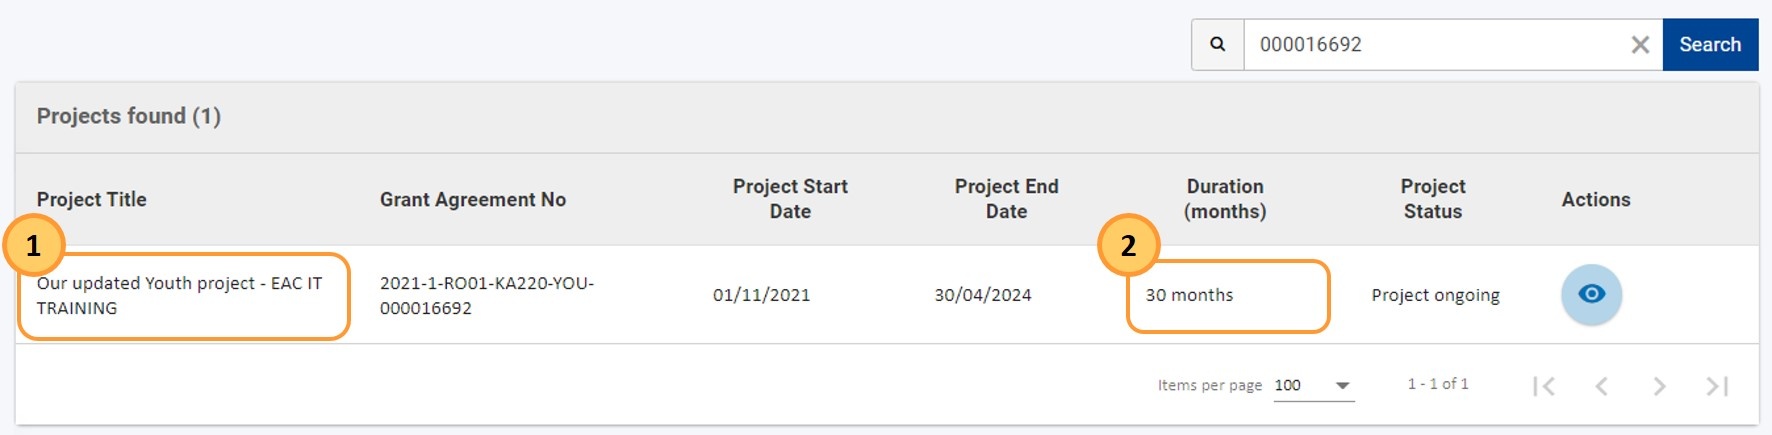 Changes to Project title and duration available in amended project